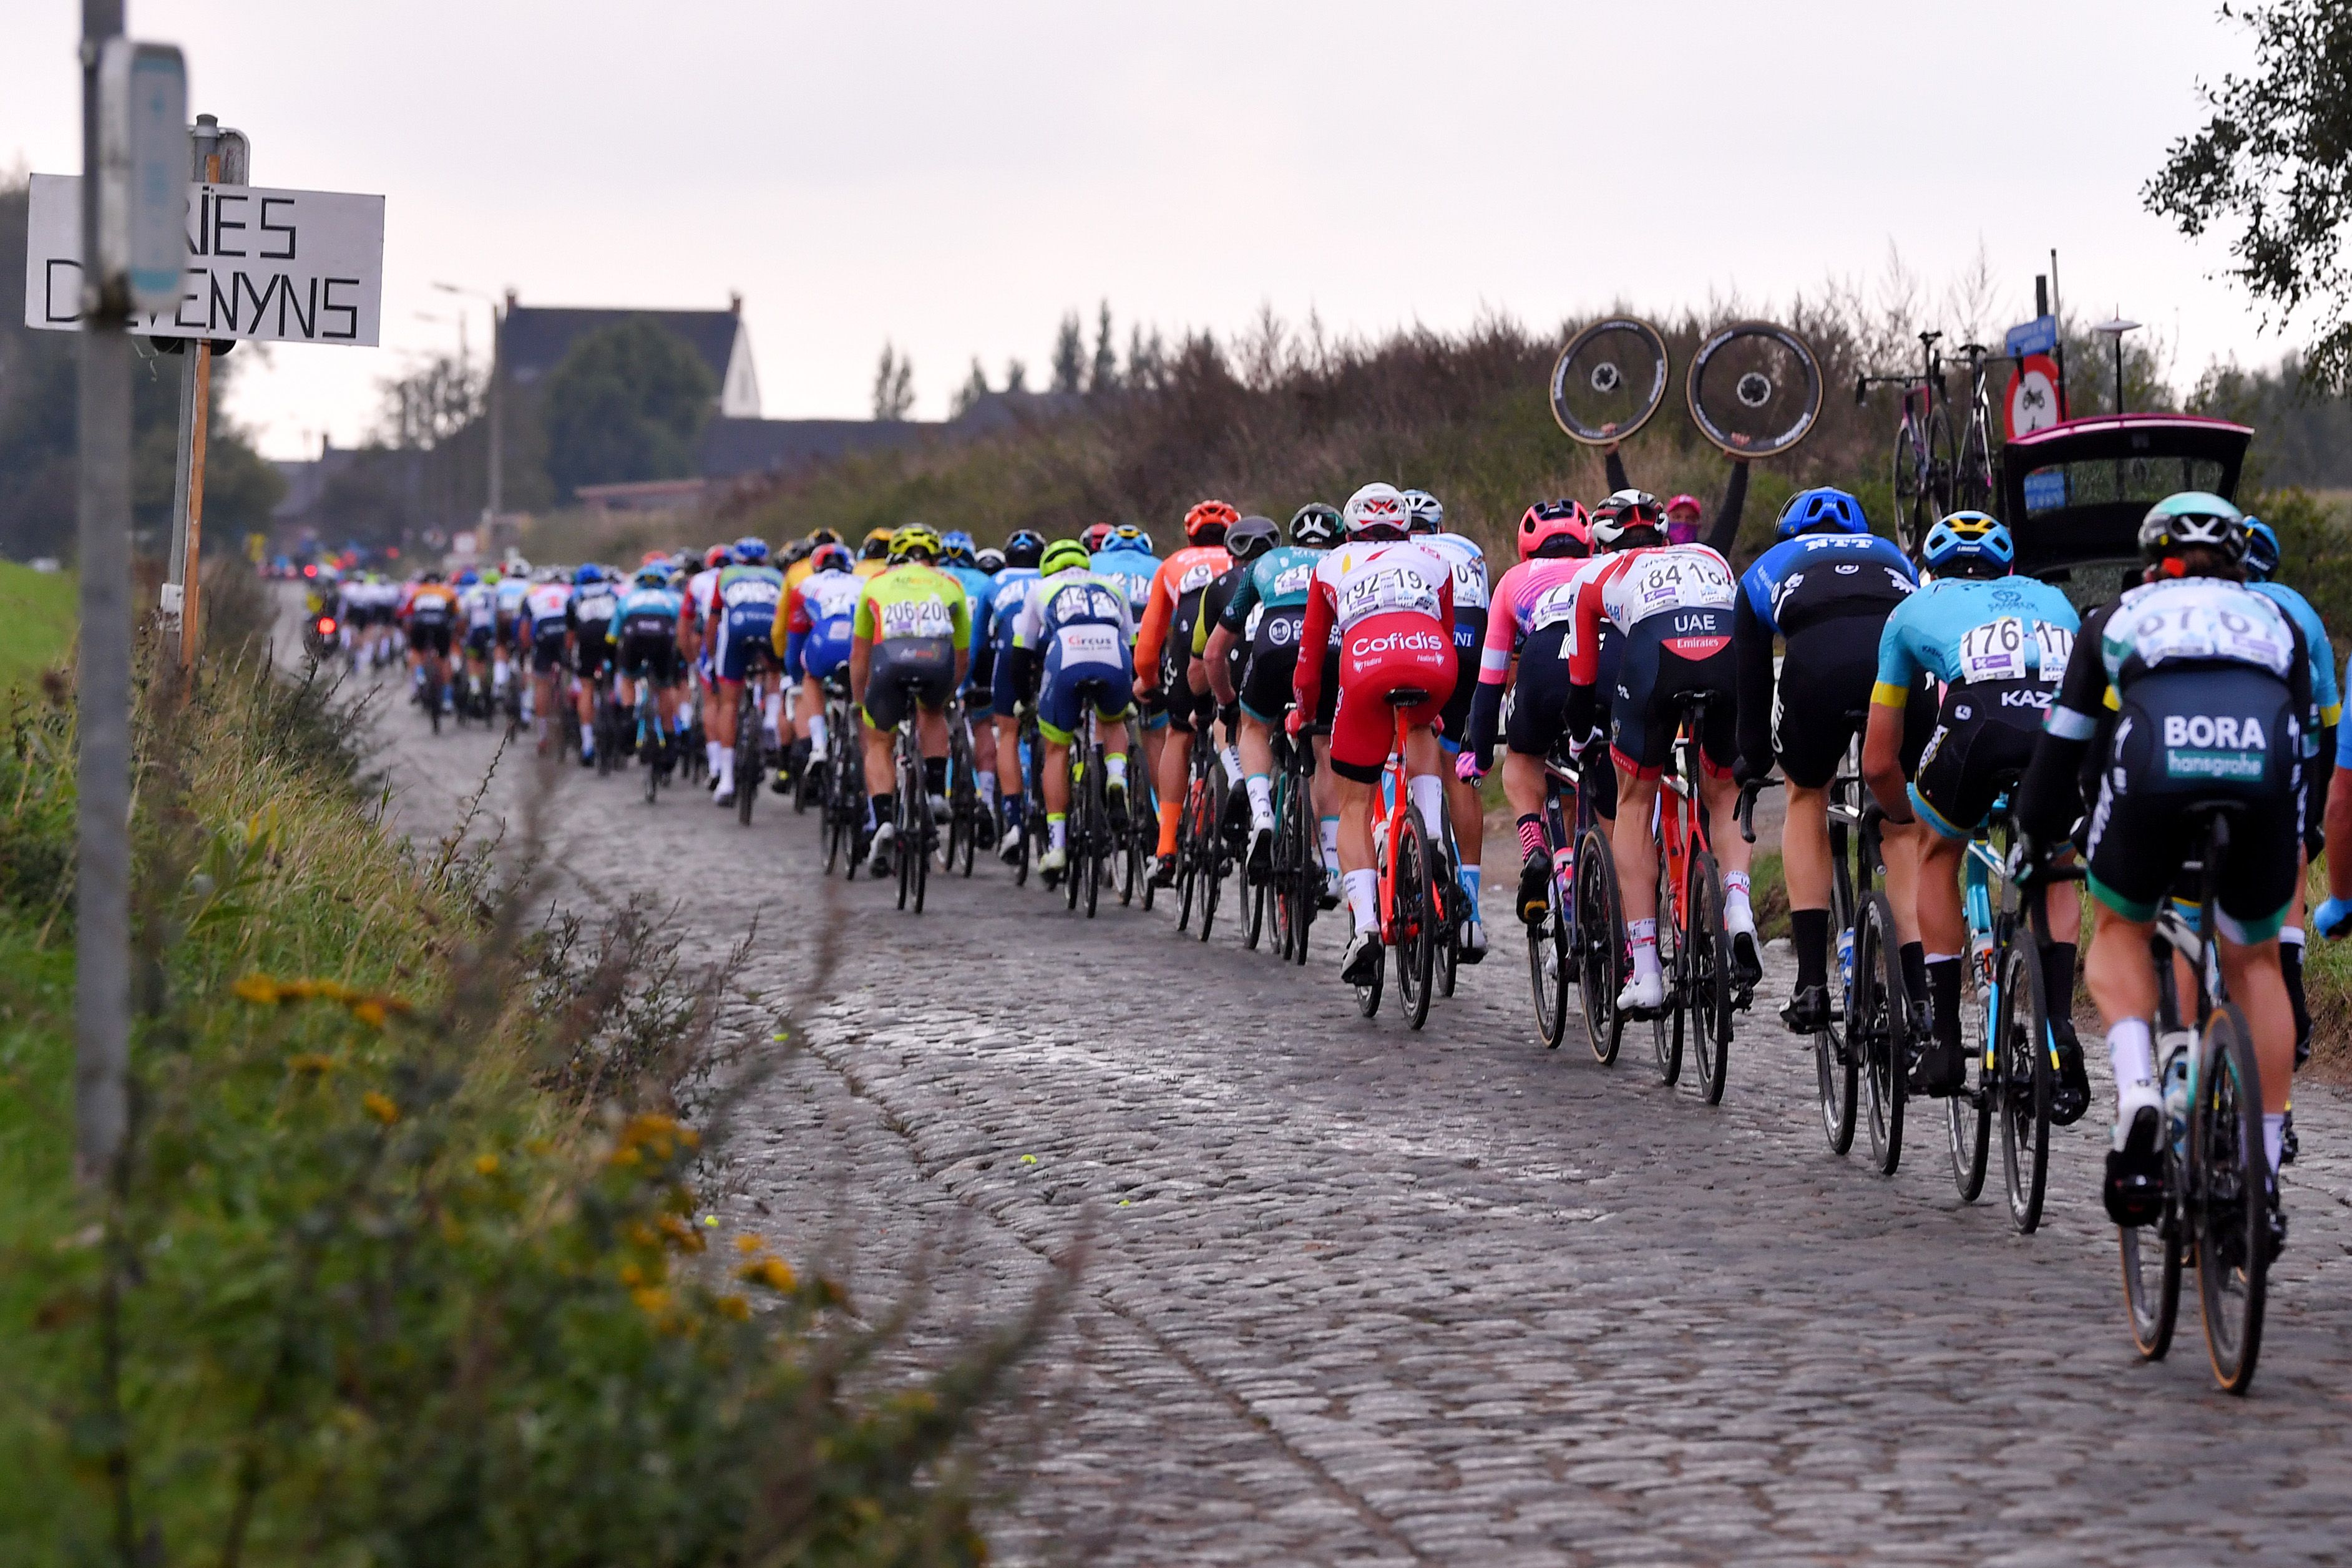 How to Watch the Tour of Flanders - Preview and Streaming Info